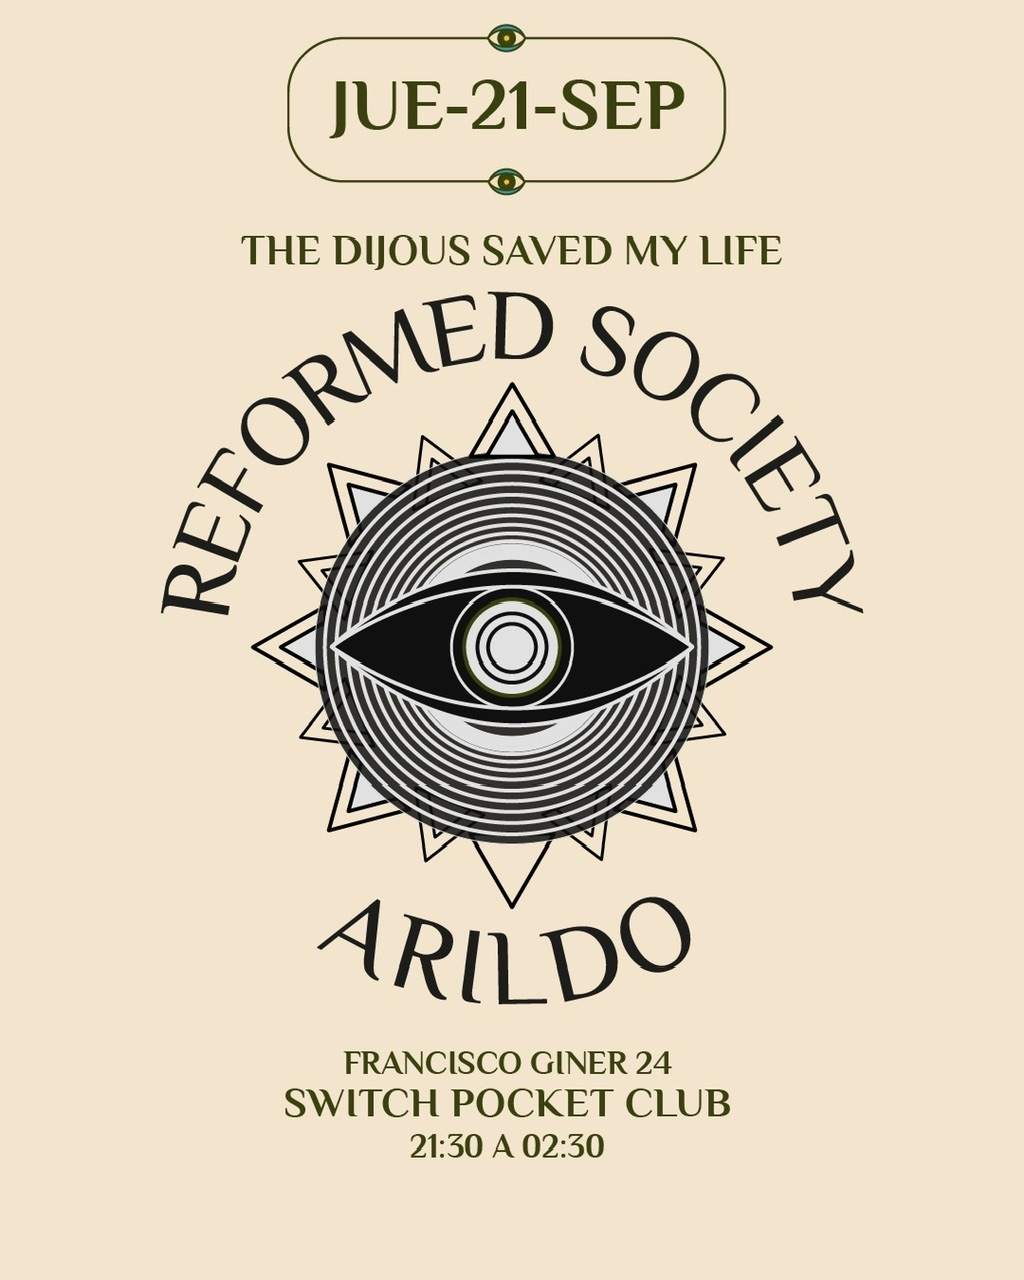 The Dijous Saved My Life: Reformed Society, Arildo - フライヤー表